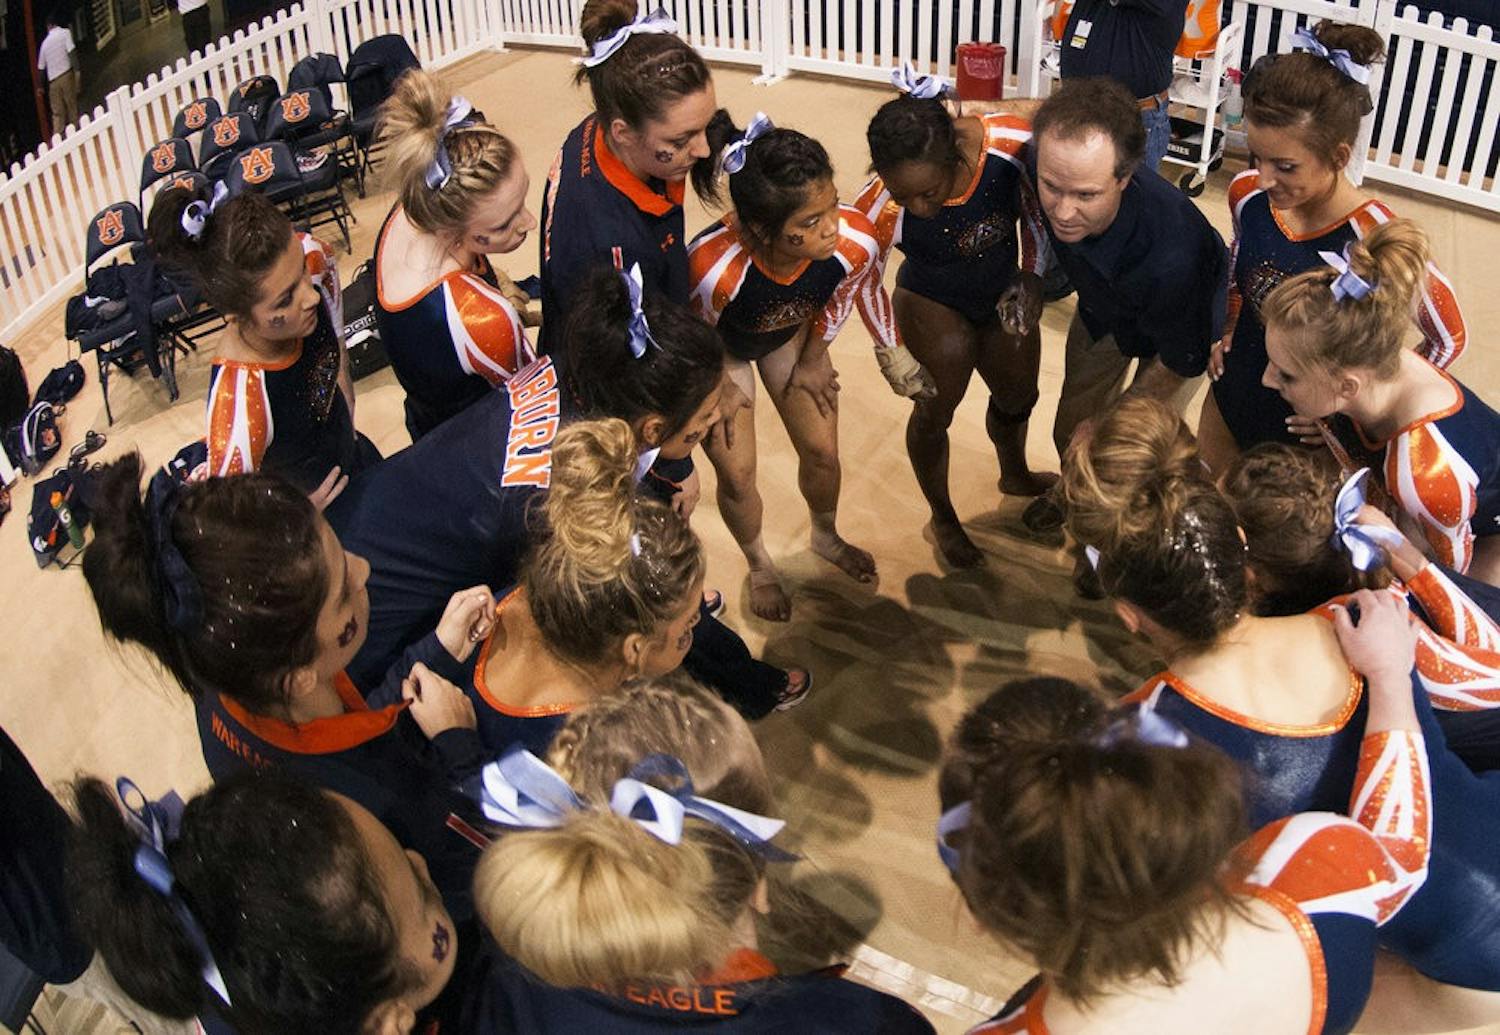 Coach Jeff Graba talks to his team after the beam routines, Jan. 10, 2014. (FILE PHOTO)